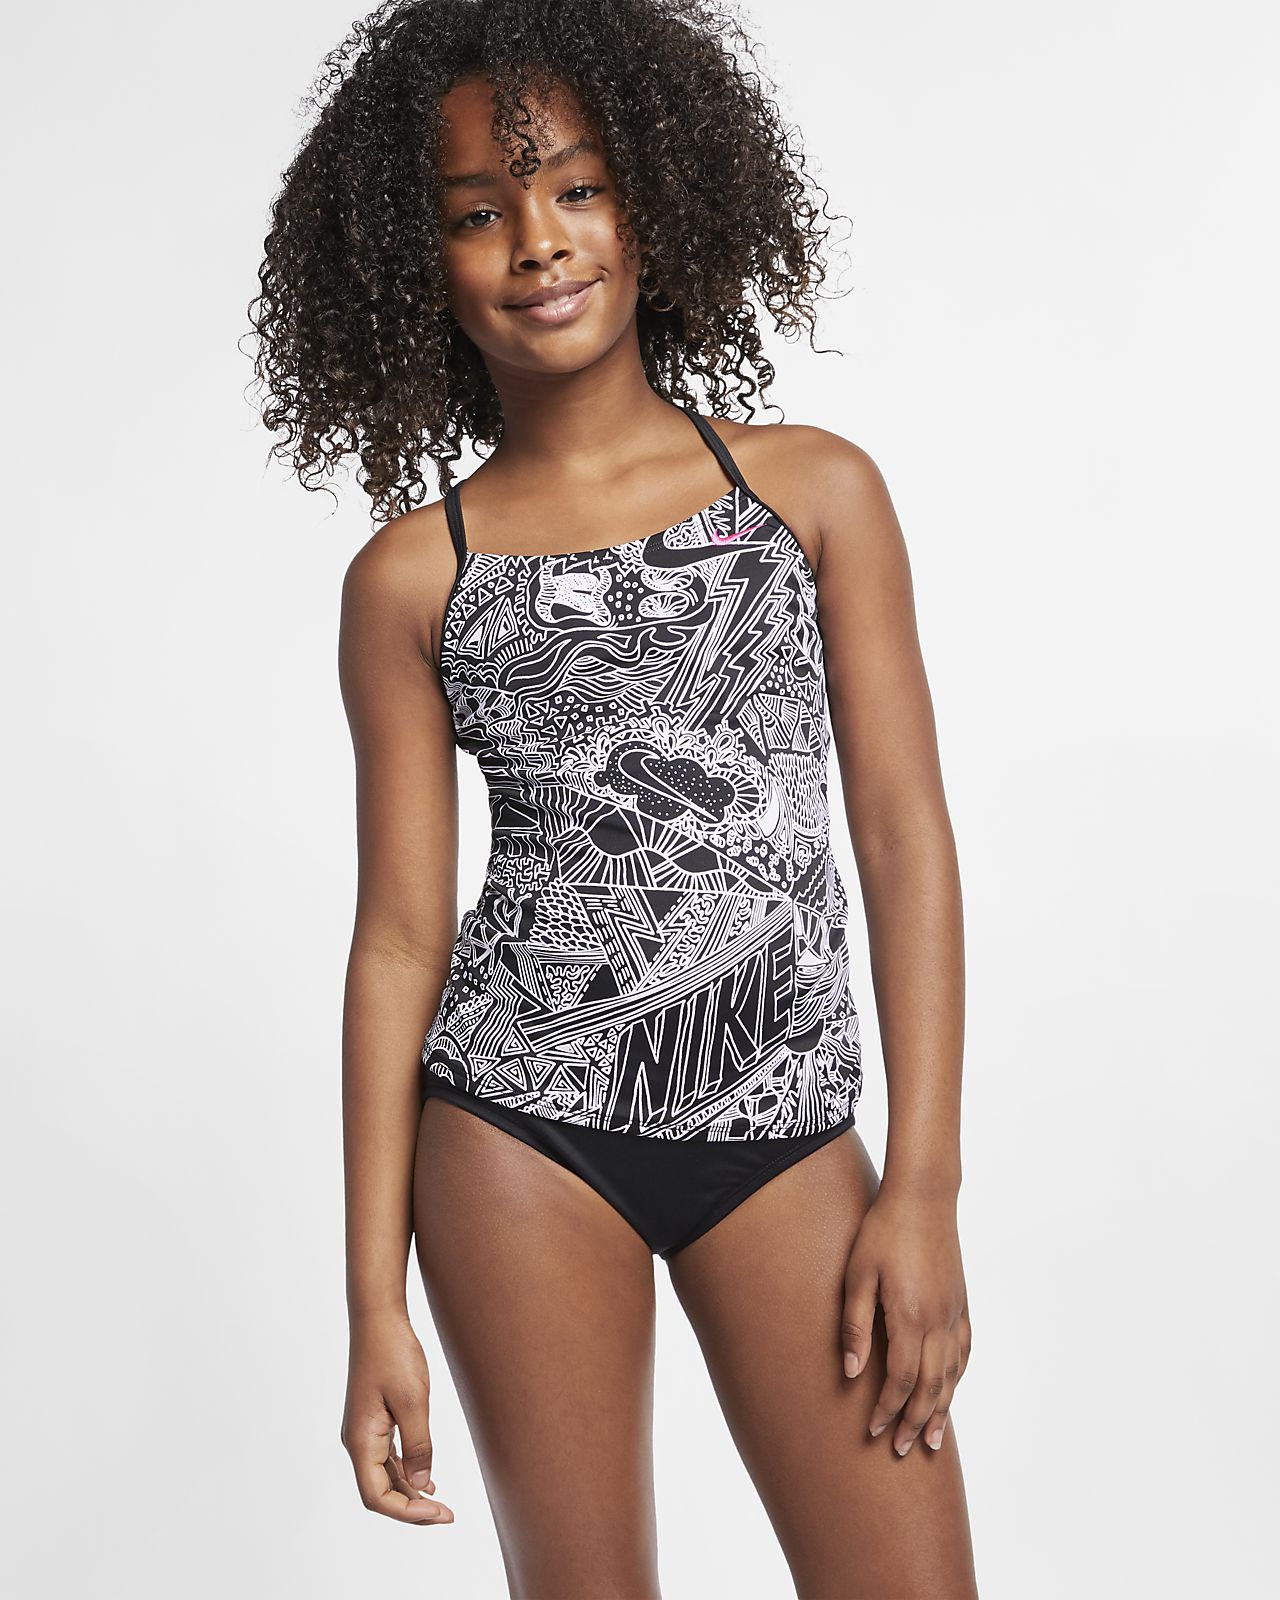 nike bathing suits for kids